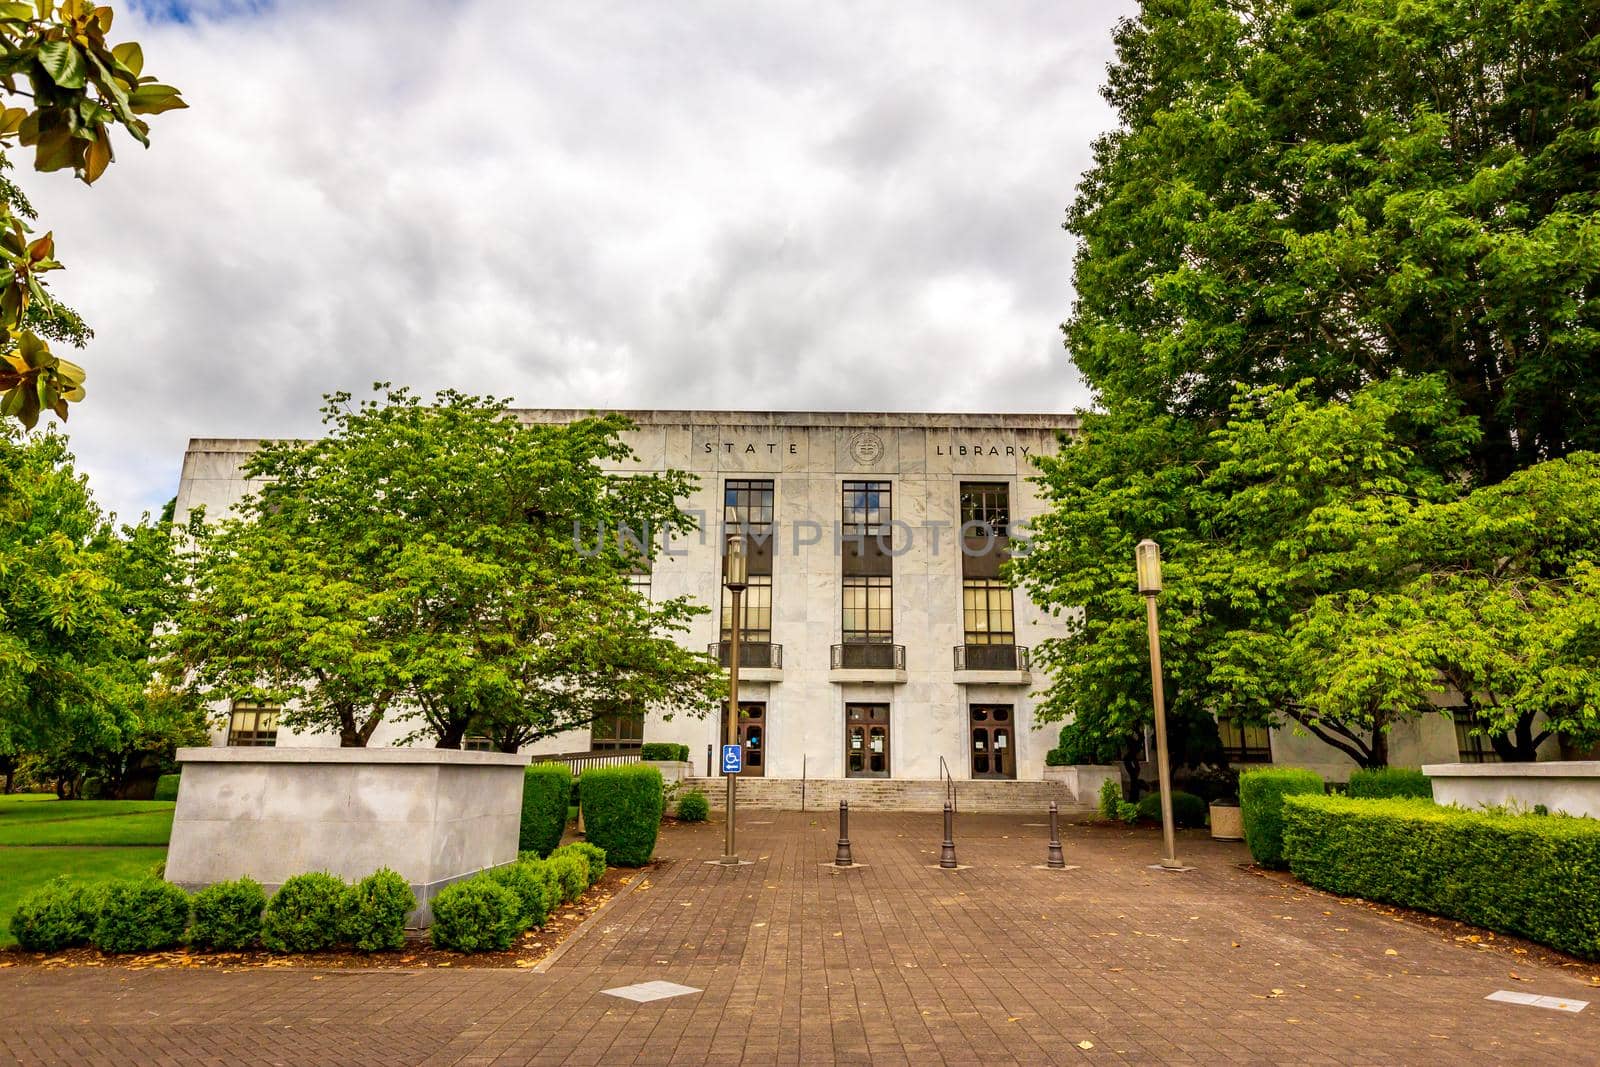 Oregon State Library Building at Oregon Capitol Mall, Salem